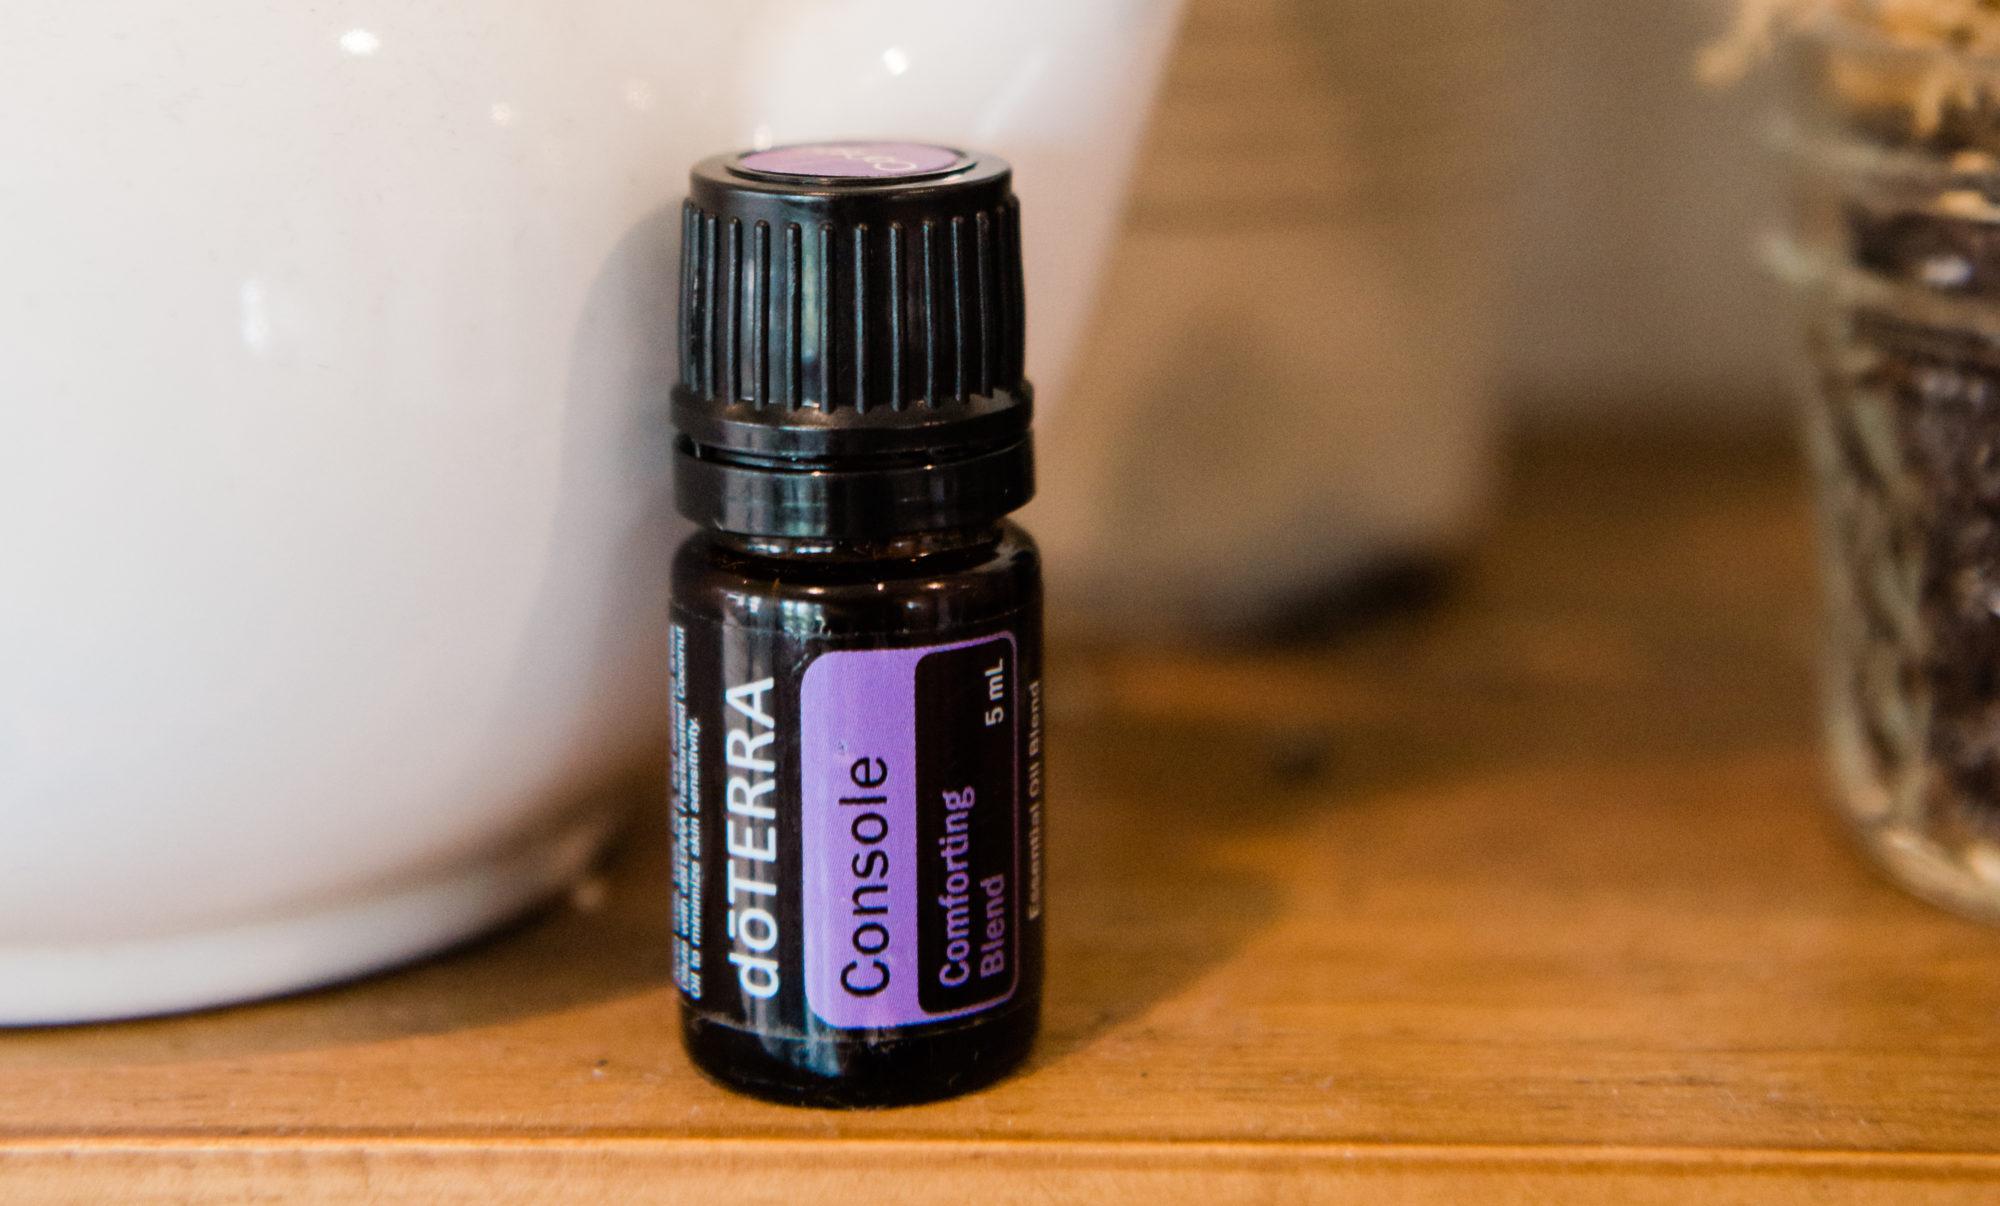 doTERRA bottle of Console Essential Oil on wood table